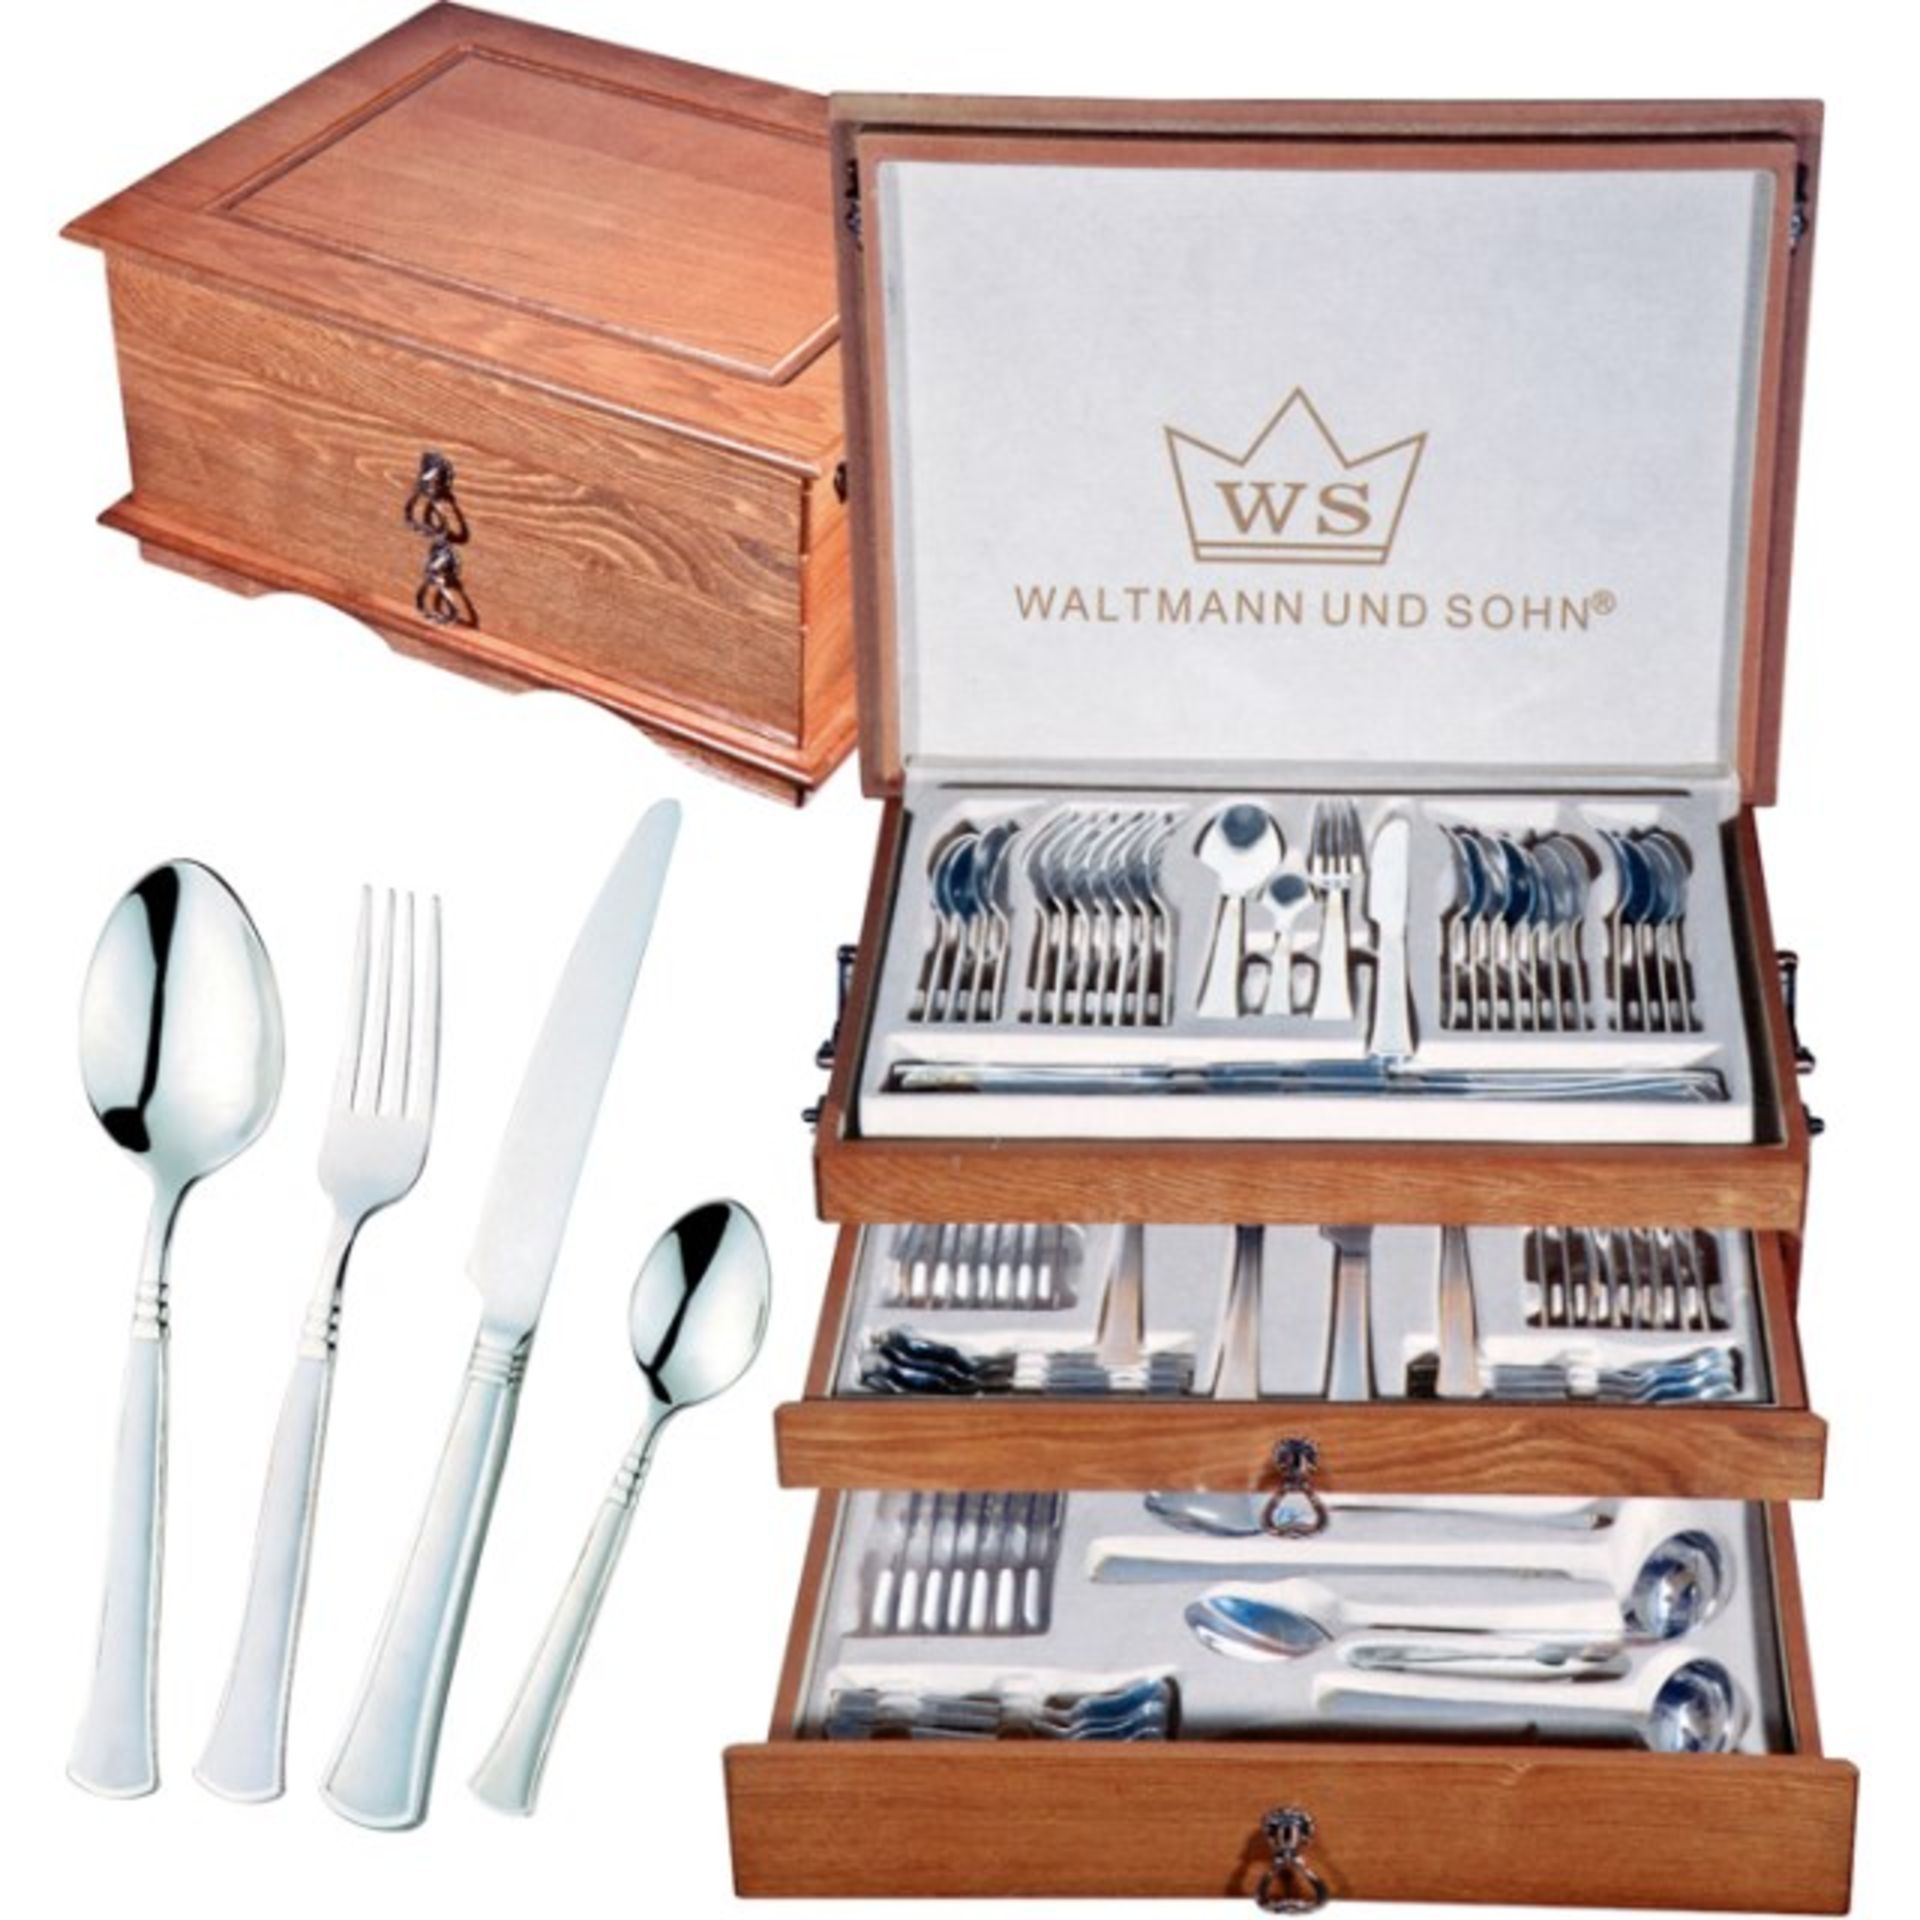 V 87pce Polished Stainless Steel Waltmann And Sonn Cutlery Set In Oak Case With Two Drawers RP750